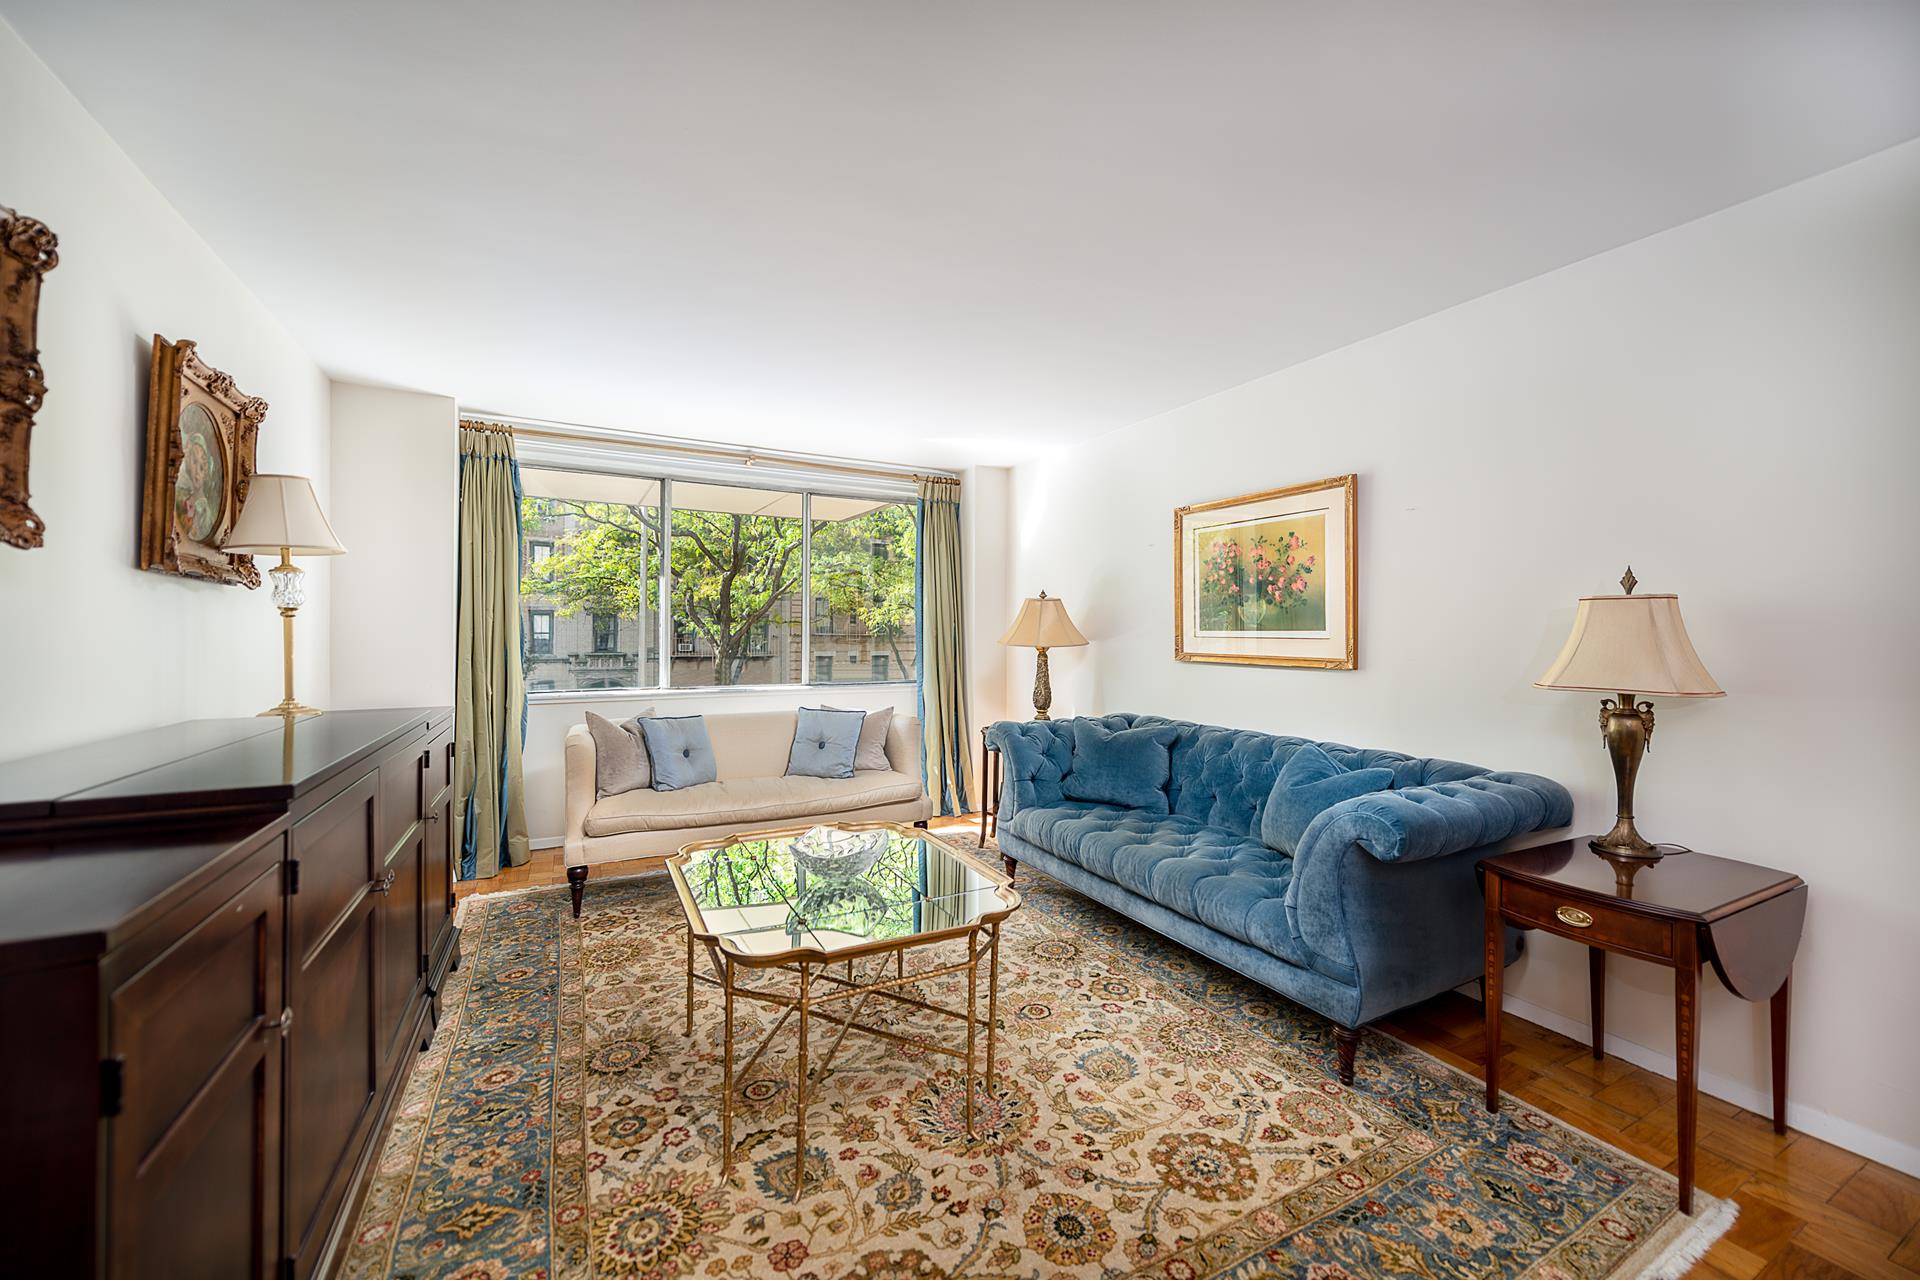 This sun filled quiet south facing apartment overlooking the beautiful tree lined 79th Street features 2 bedrooms, 2 baths, a powder room, and abundant closets throughout.